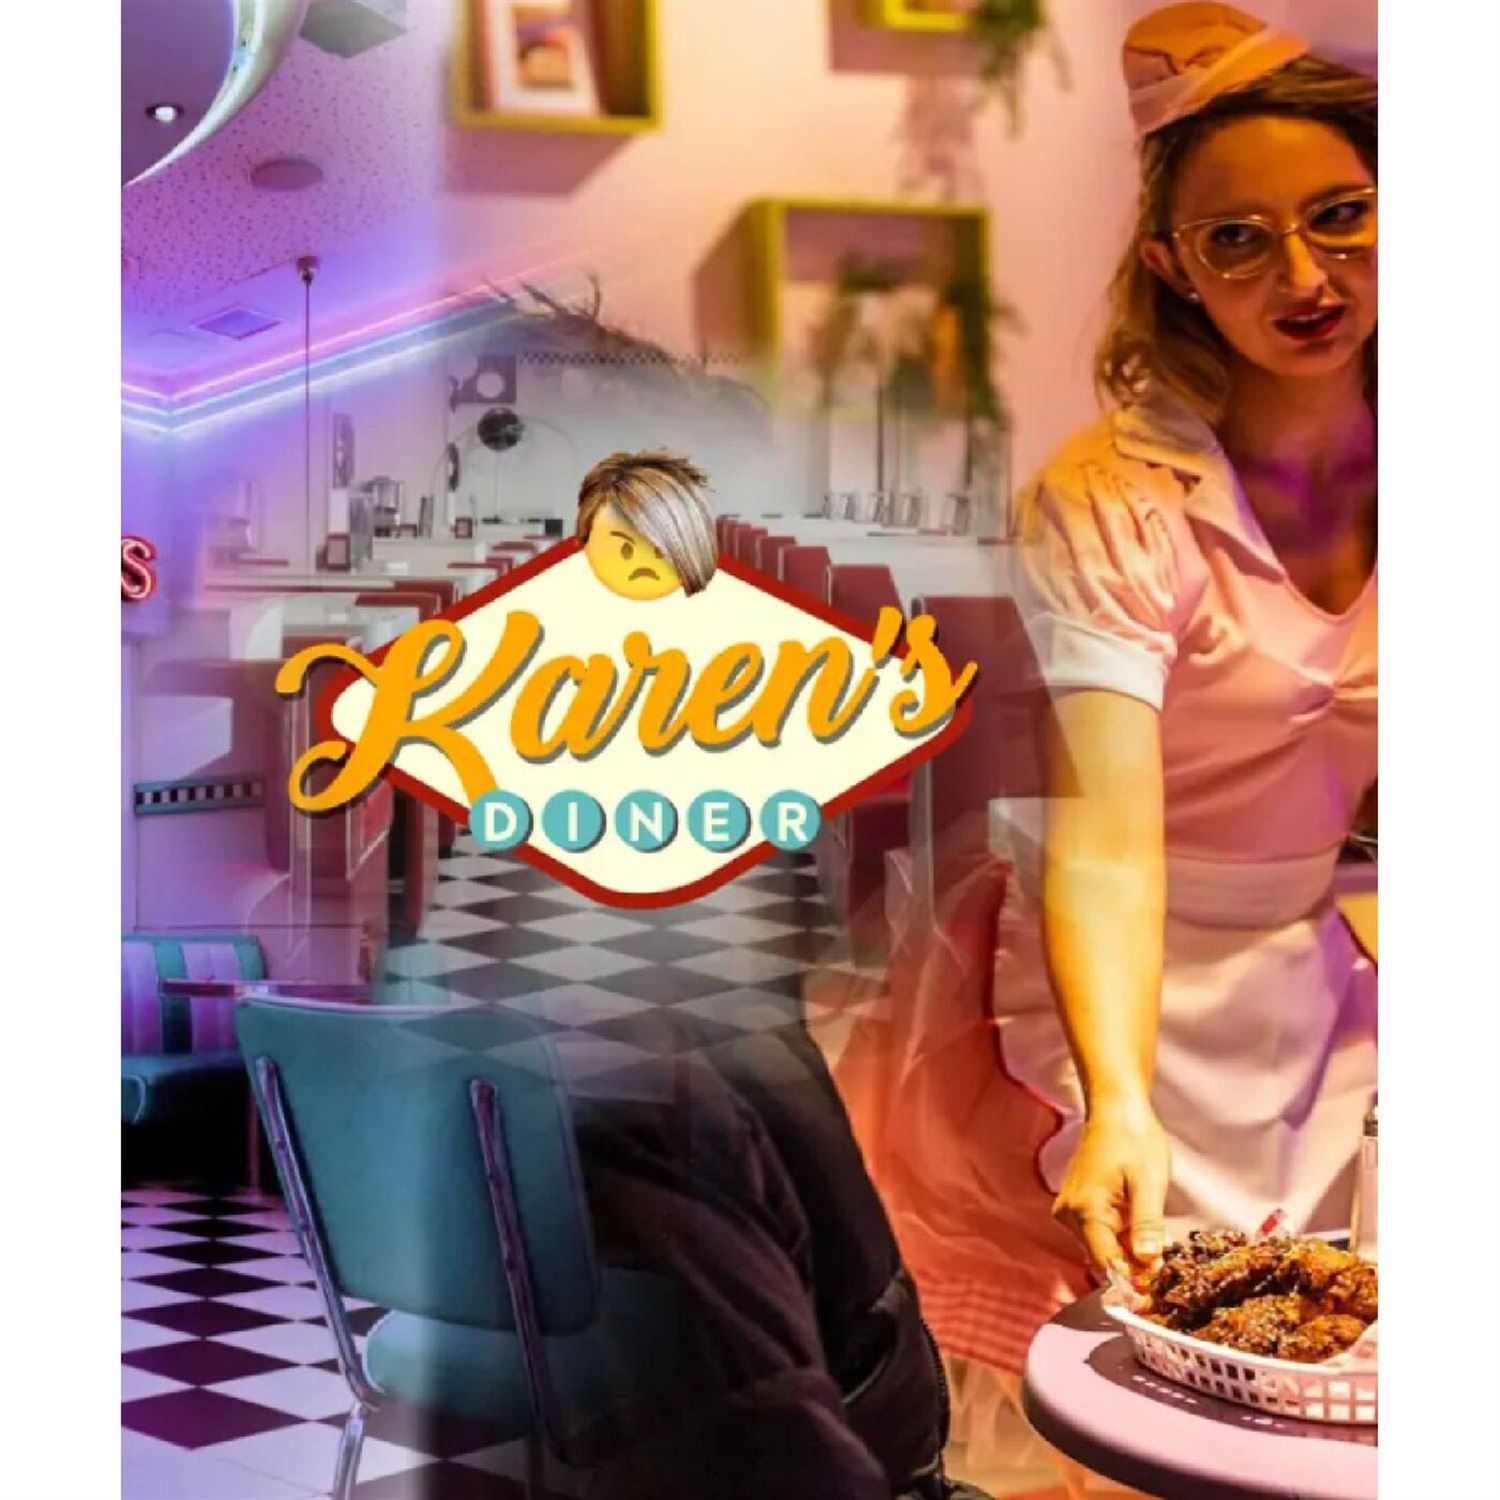 A bad experience at Karen's Diner (I want to speak to the manager!)